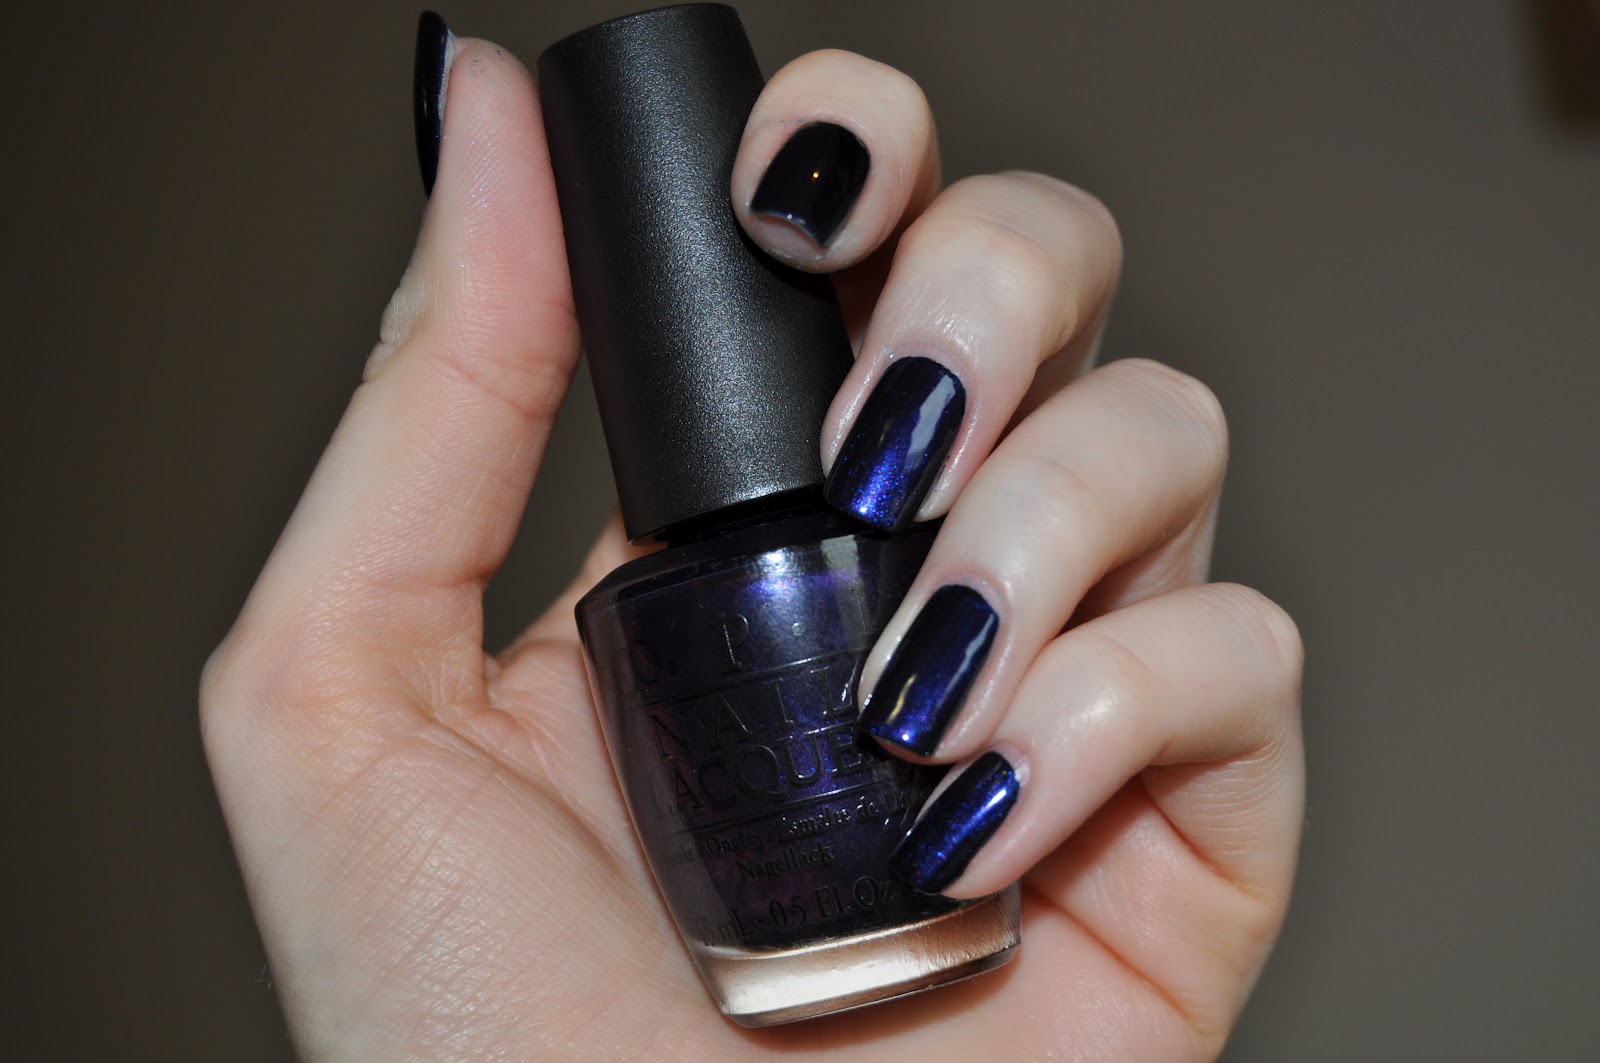 3. OPI Russian Navy - wide 2